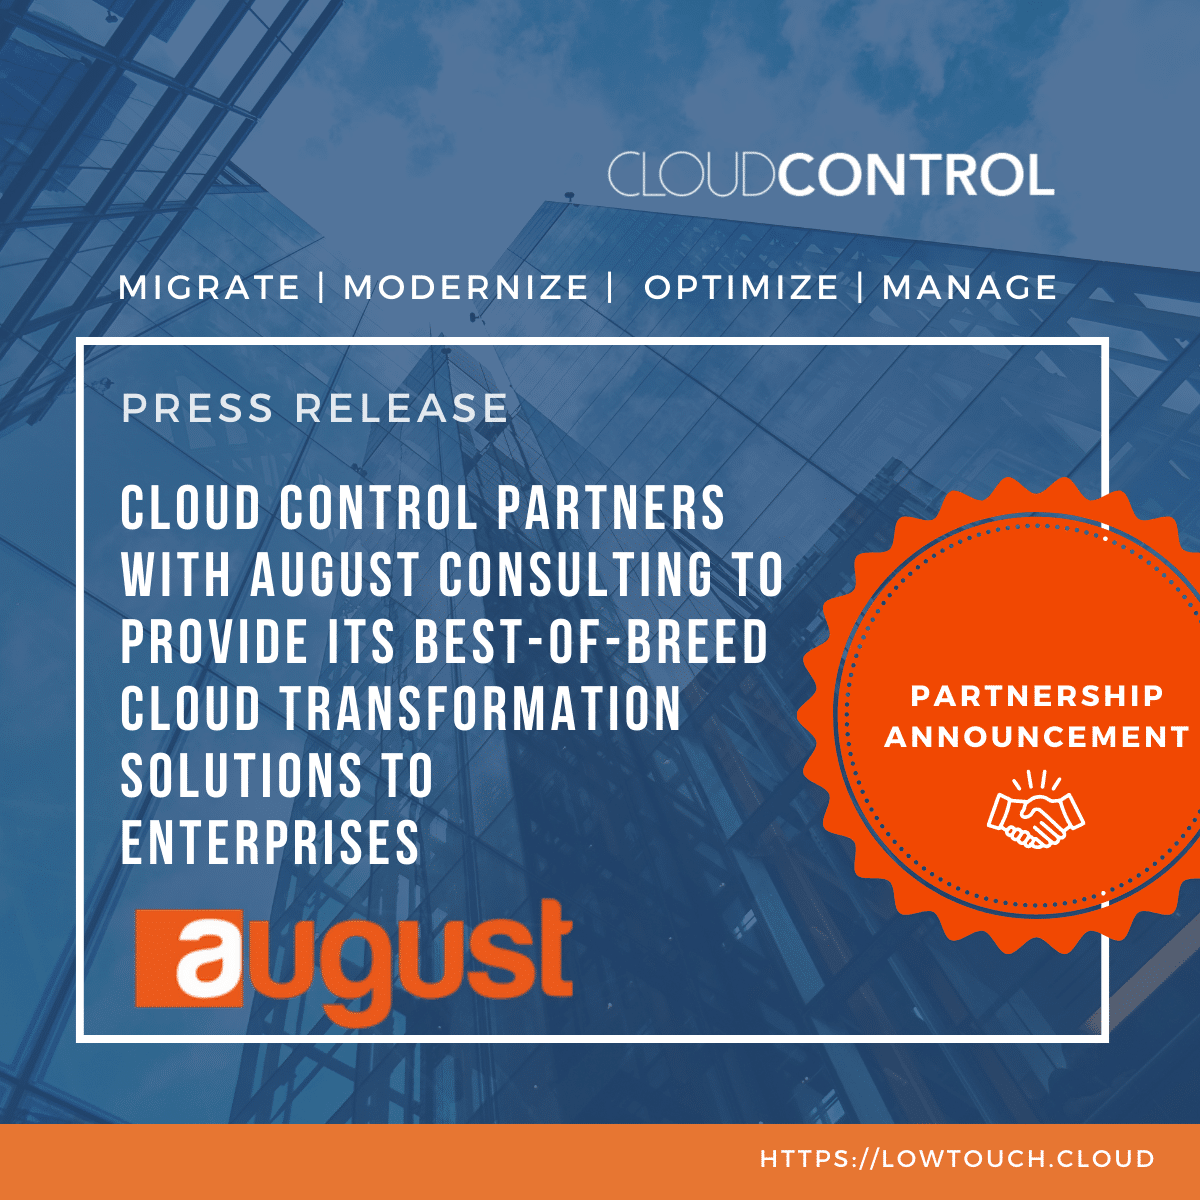 Cloud Control partners with August Consulting to provide its best-of-breed cloud transformation solutions to enterprises.